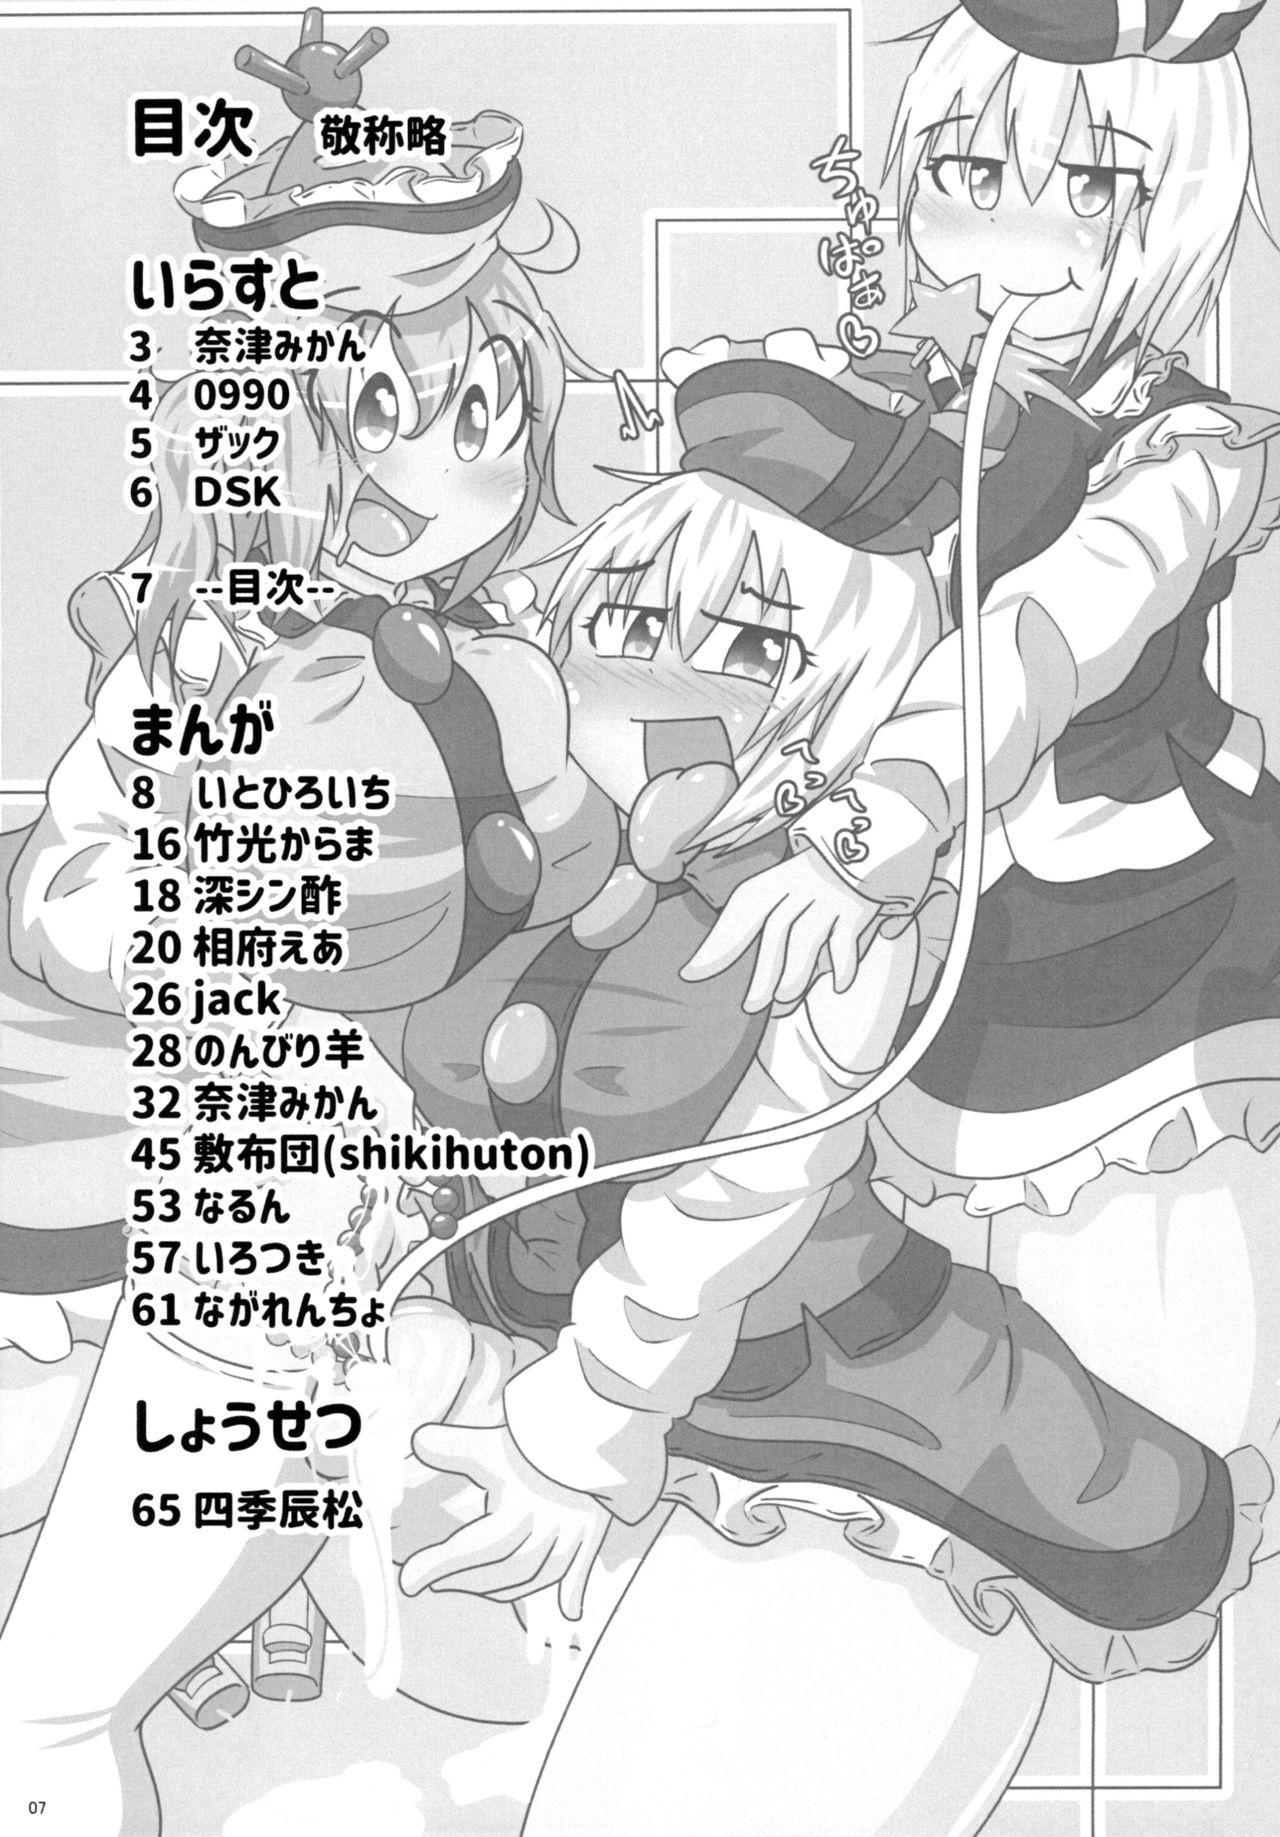 Blowjob Contest 東方おちんちん尿道責め合同 - Touhou project Panocha - Page 7